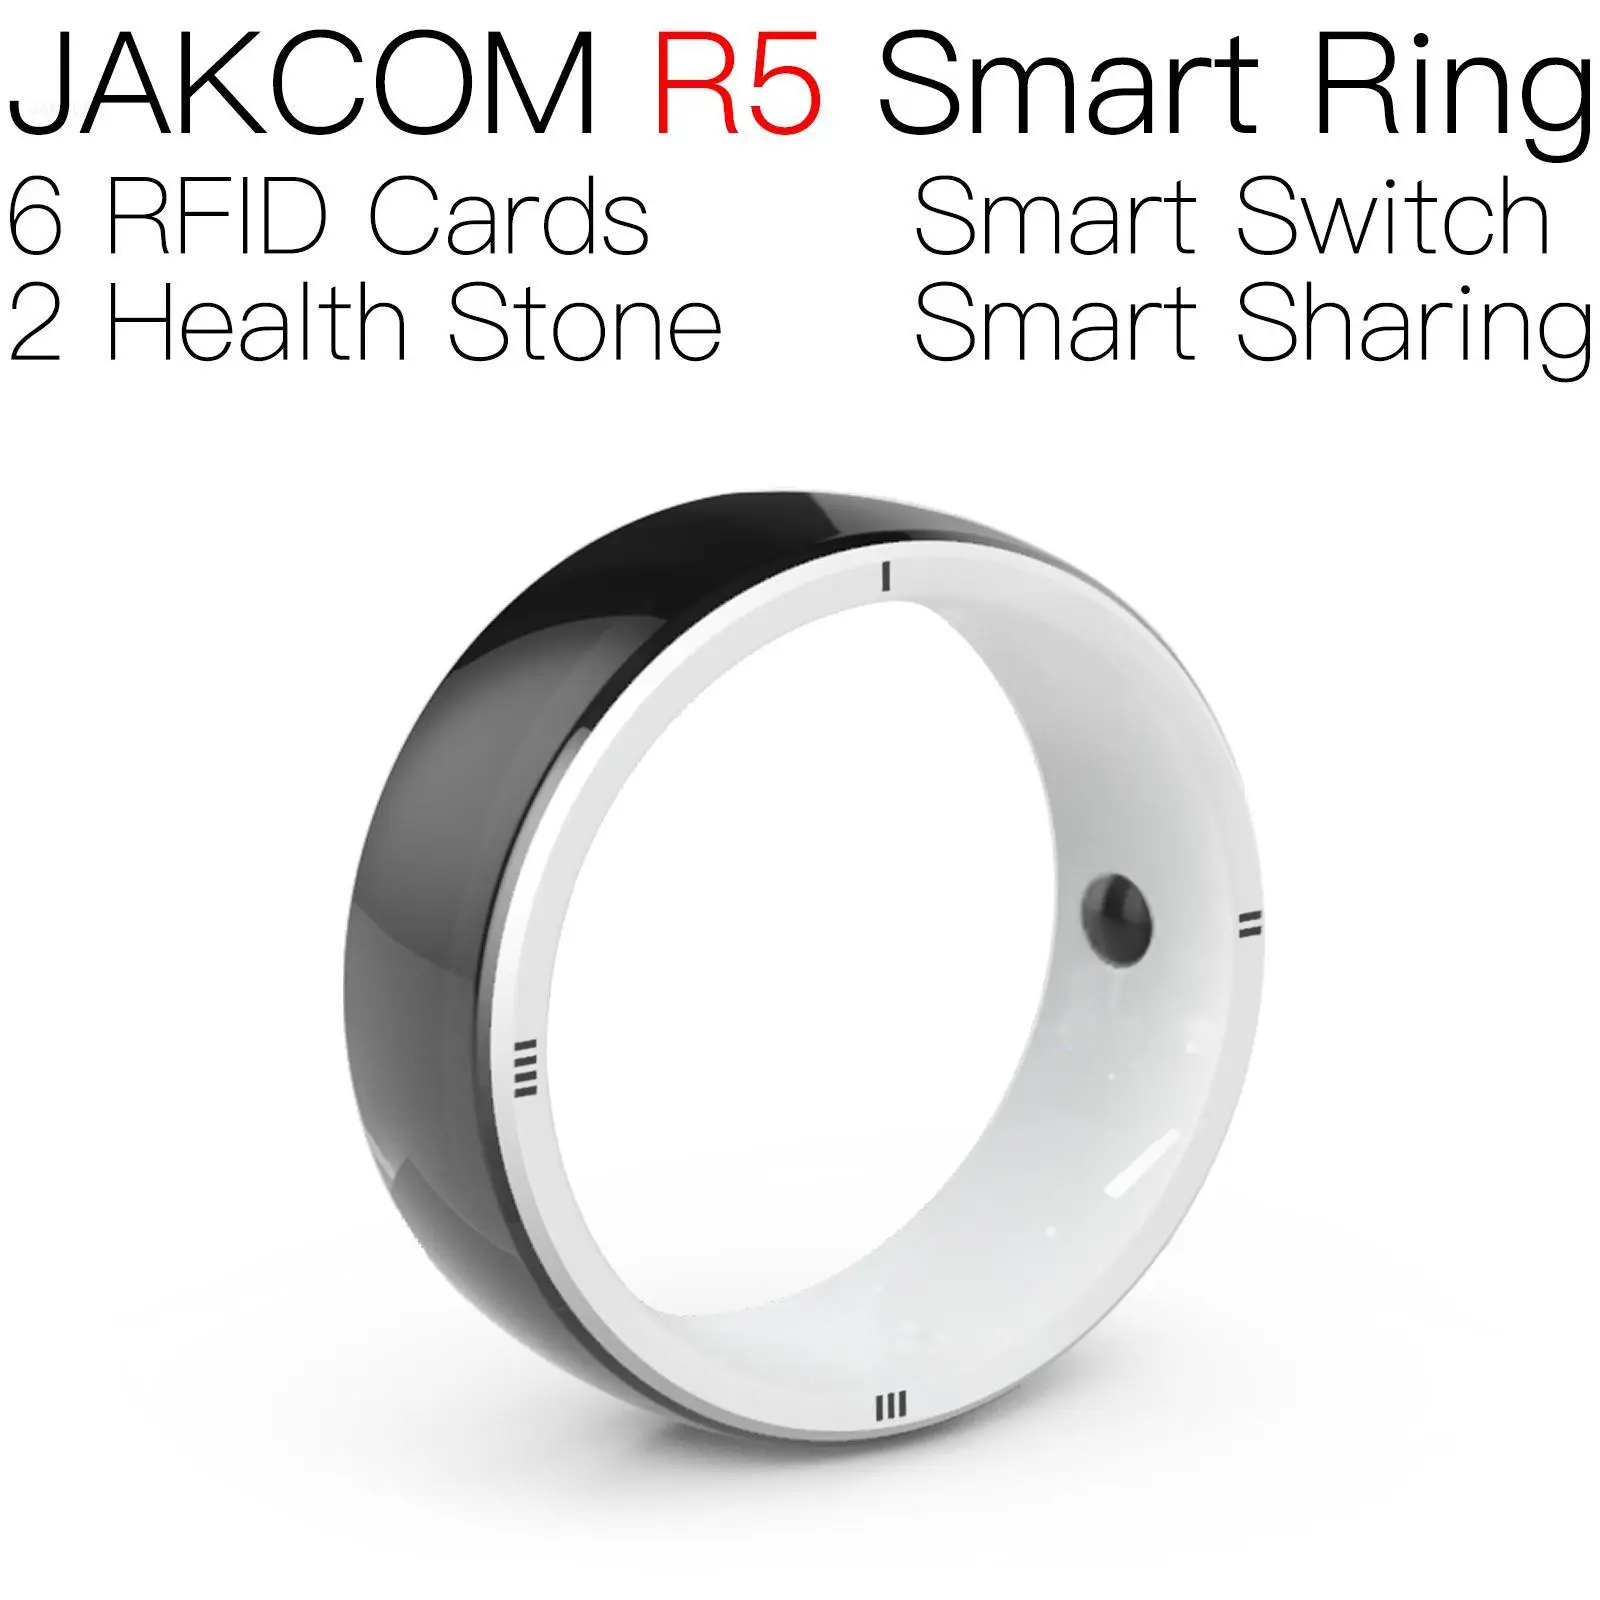 

JAKCOM R5 Smart Ring Newer than rfid rewritable 125mhz universal id coil nfc sticker logo cattle ear tags for cows tag hueur